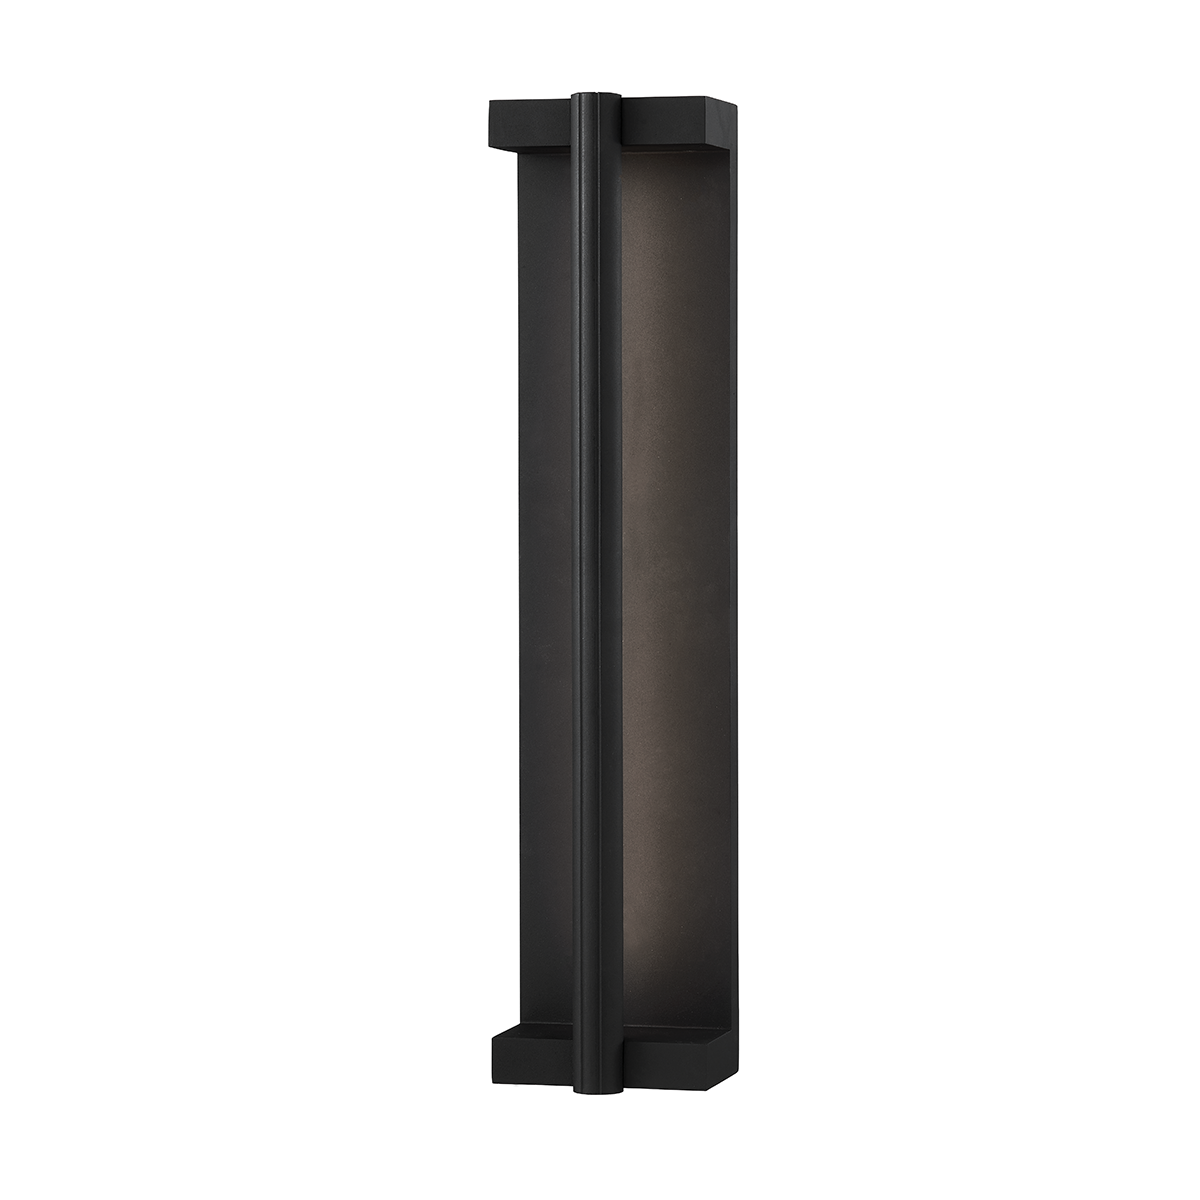 Troy Lighting 1 LIGHT LARGE EXTERIOR WALL SCONCE B1252 Outdoor l Wall Troy Lighting TEXTURE BLACK  